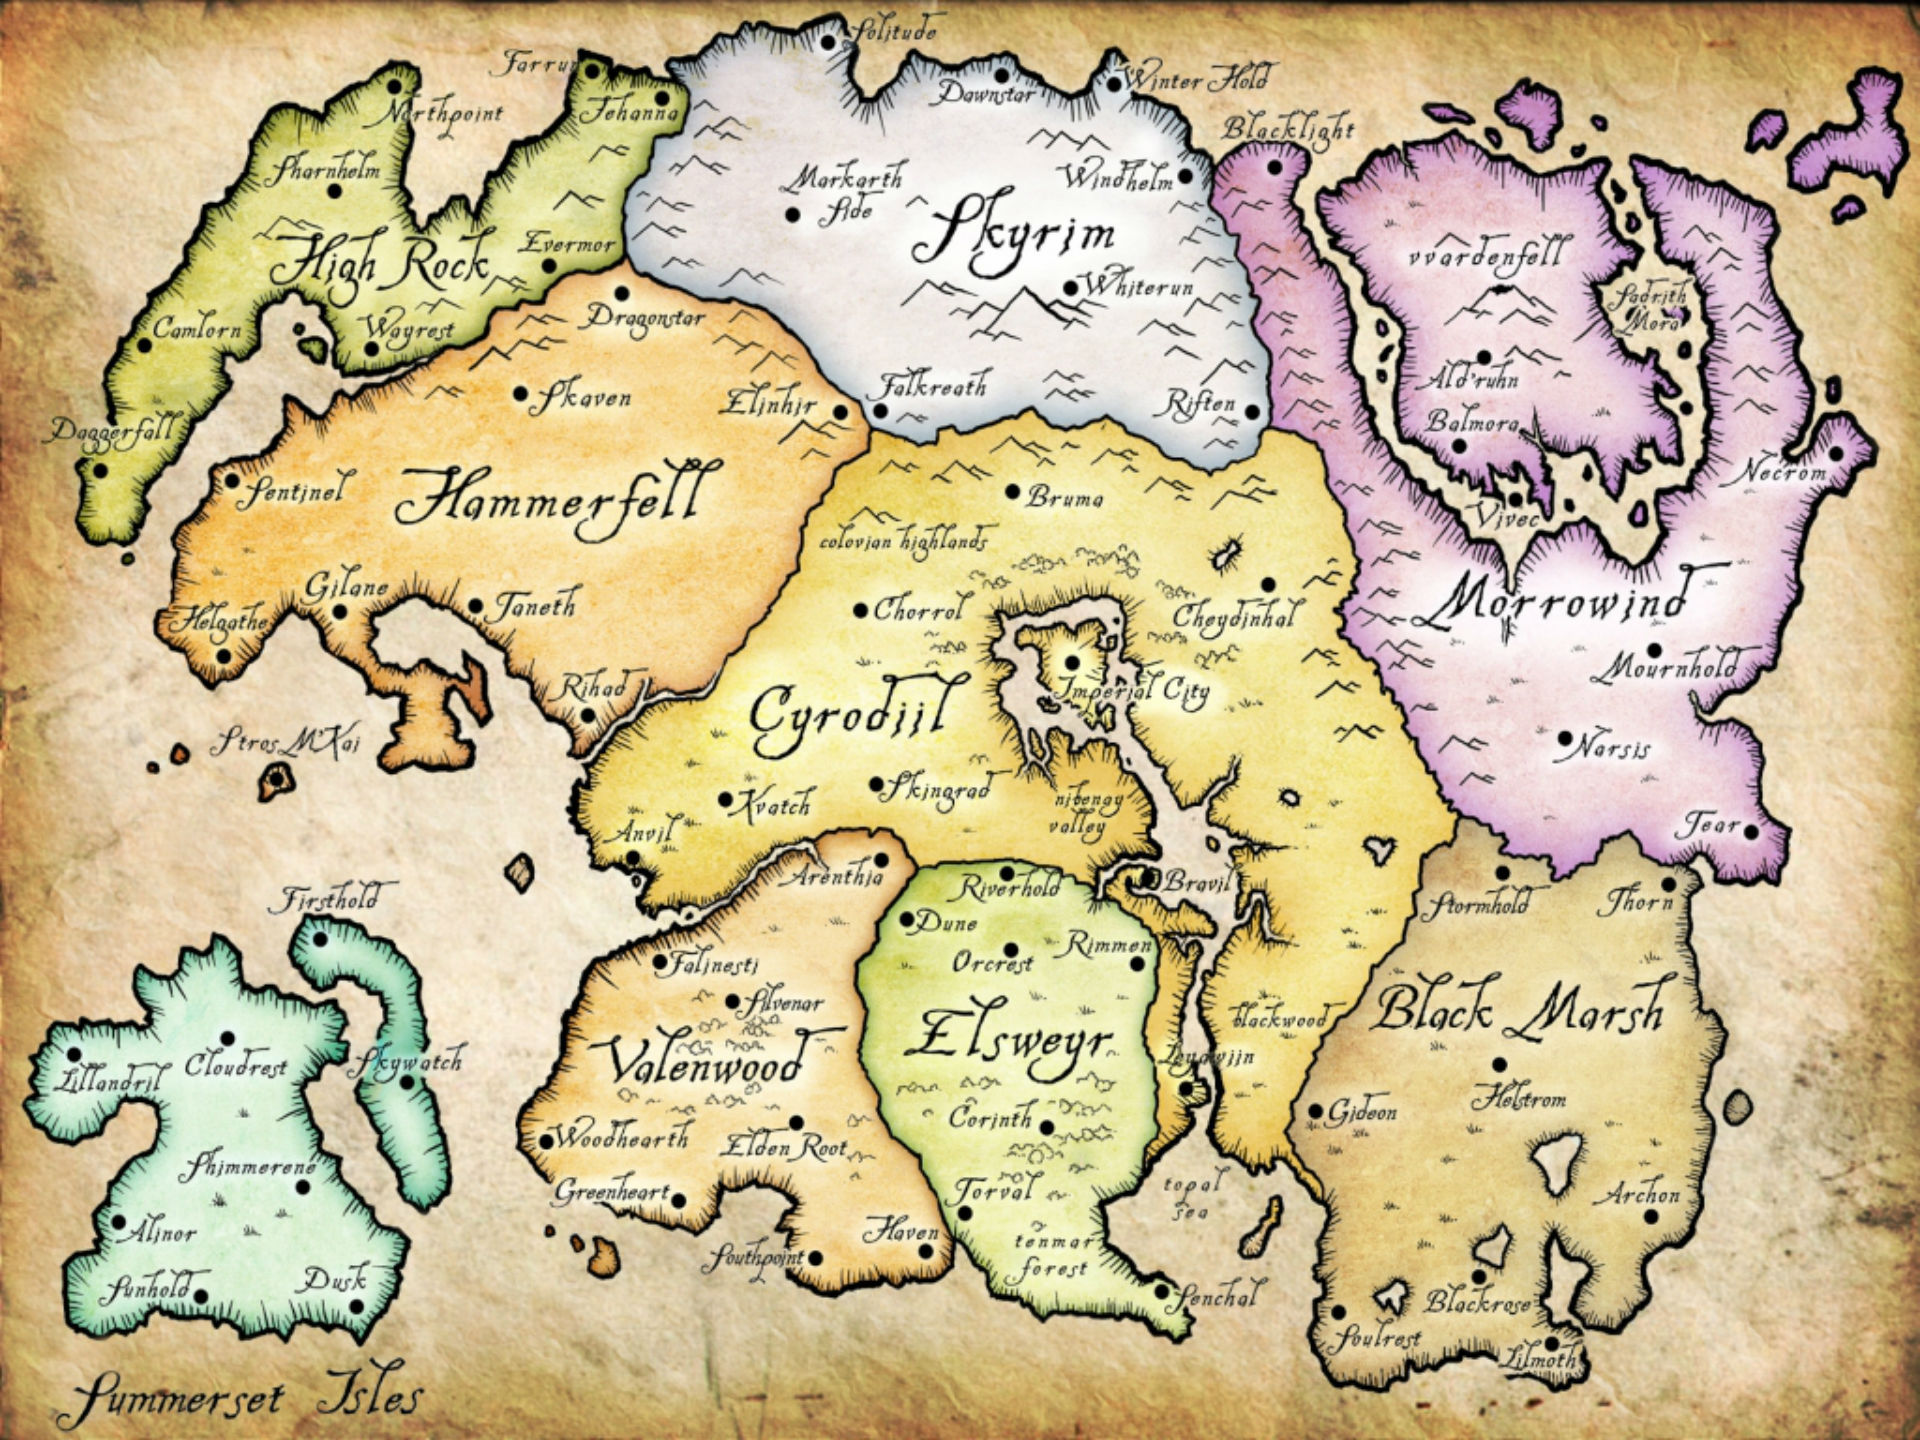 The Elder Scrolls 6 release date speculation and rumours: A shot of a 2D map of Tamriel, and all its regions